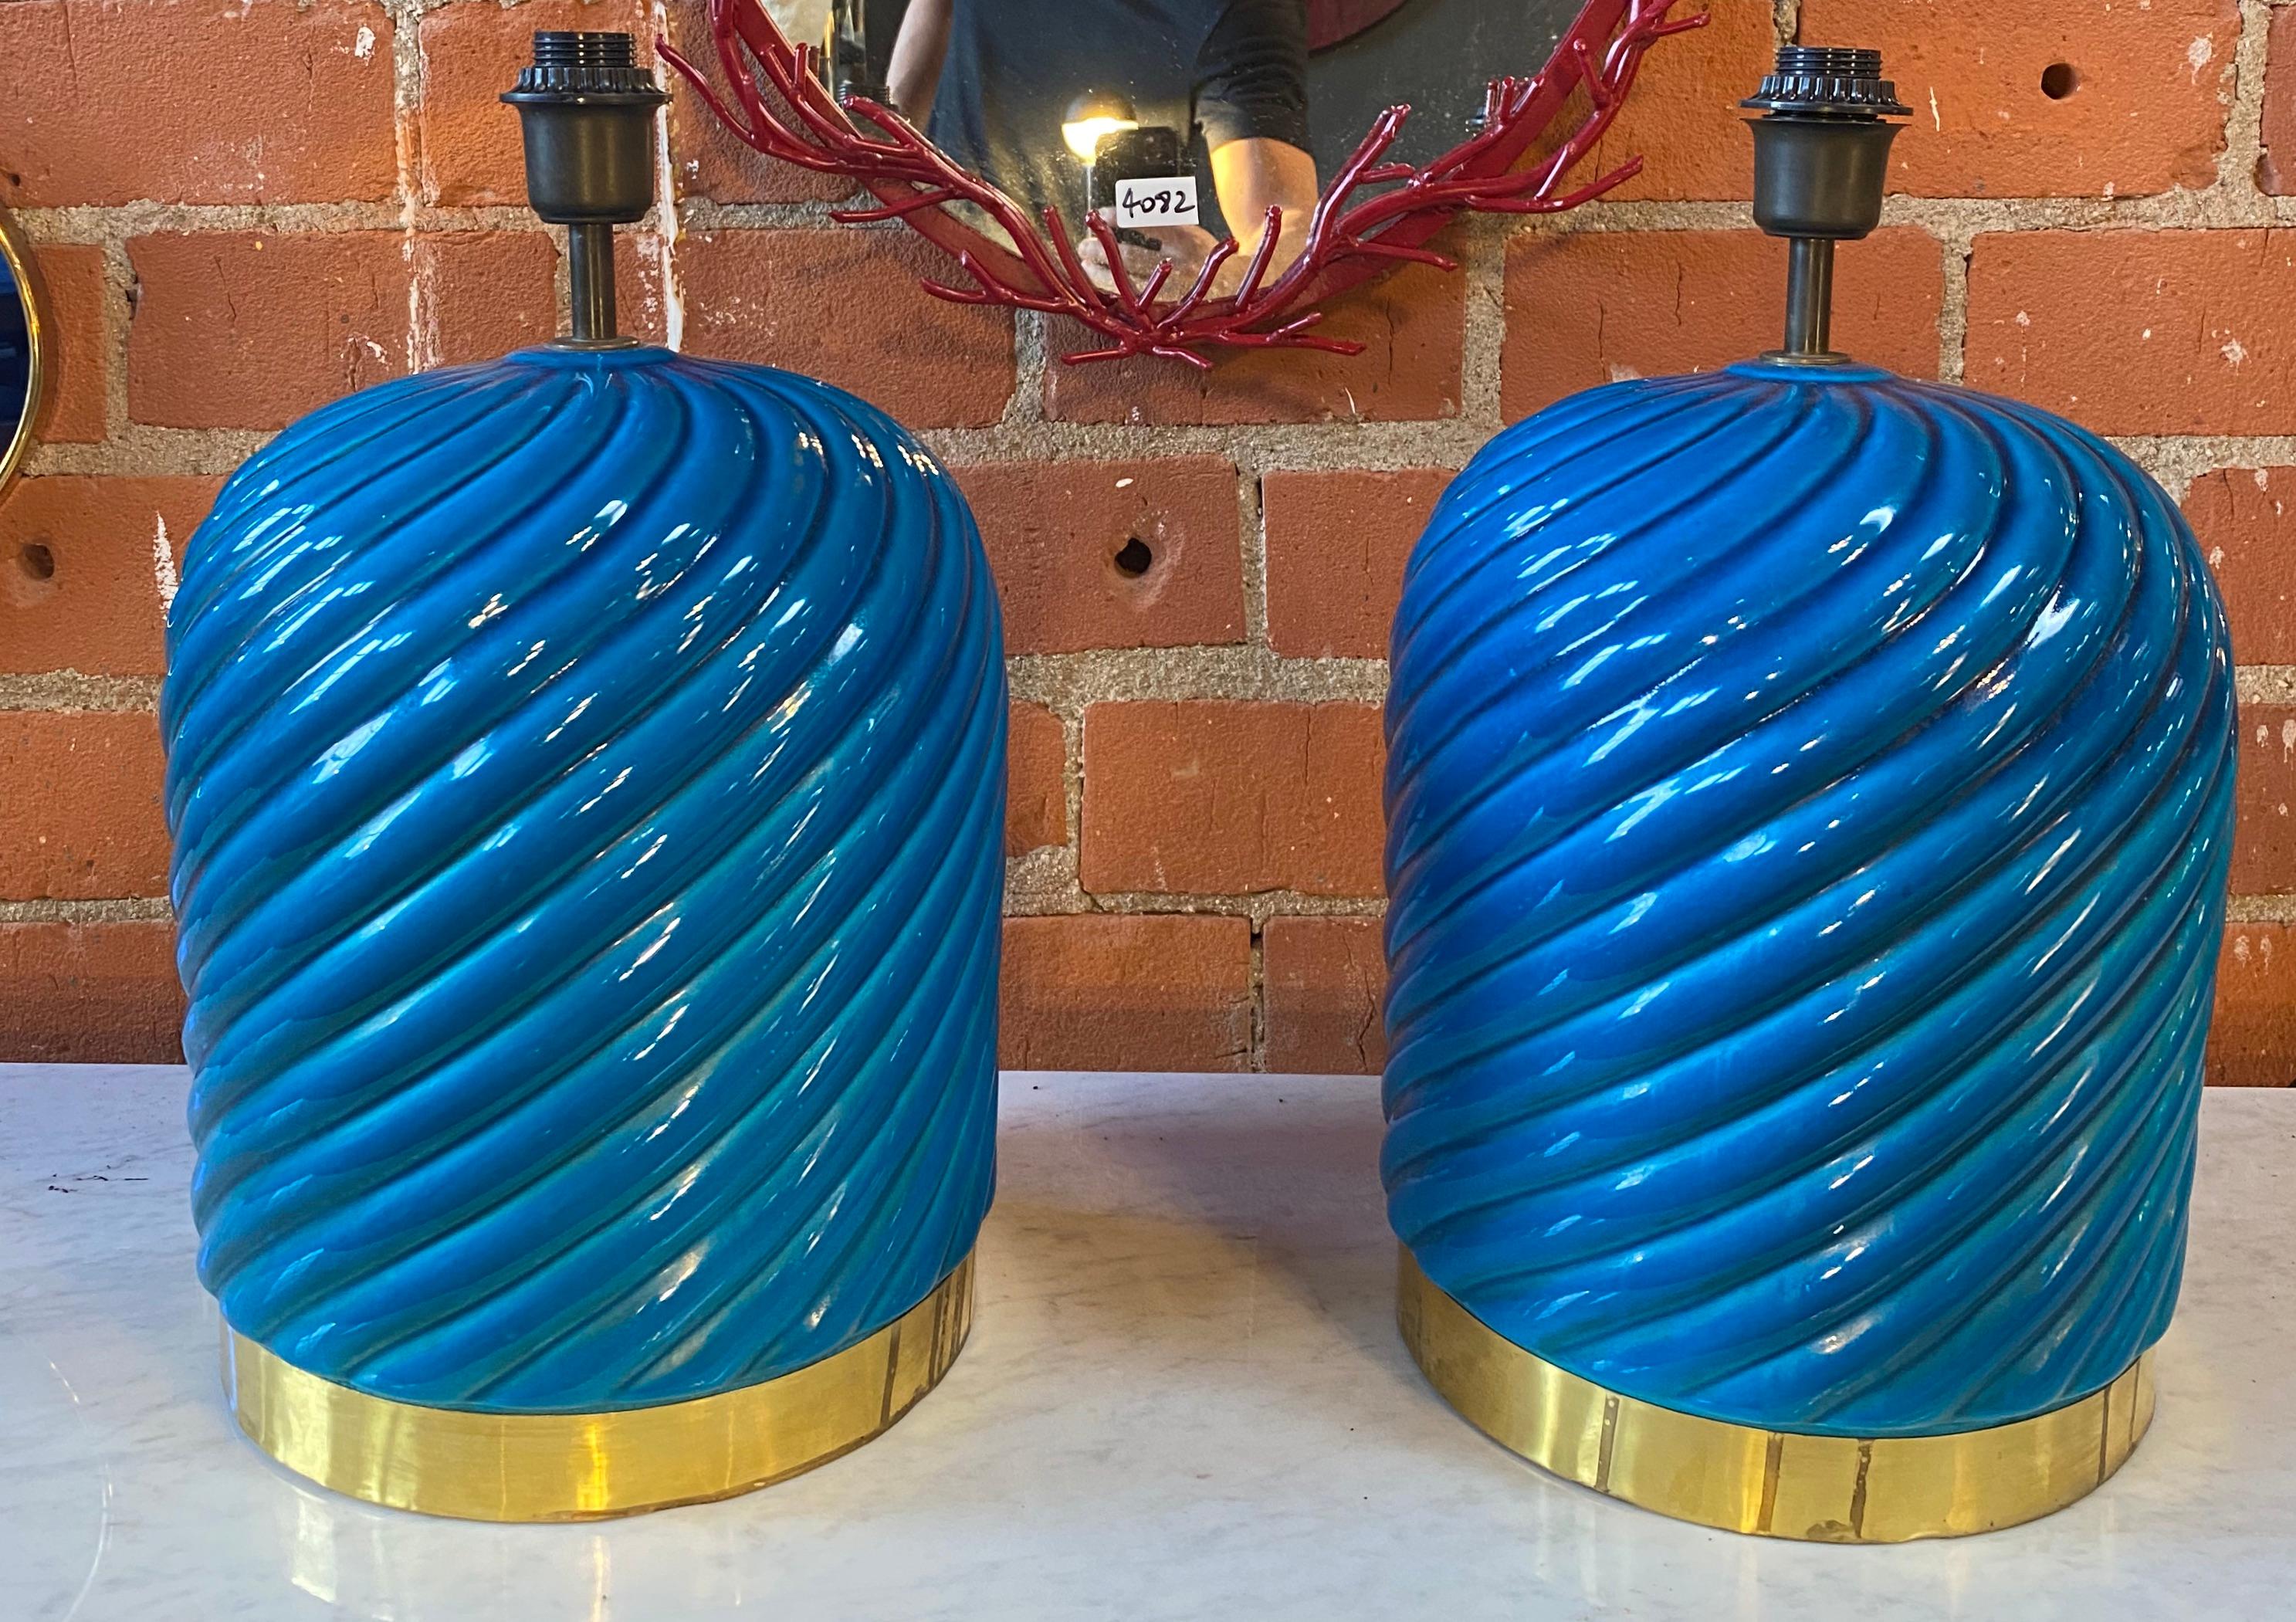 Pair of 2 table lamps made with blue ceramic and brass details. The lamps do not include shades.